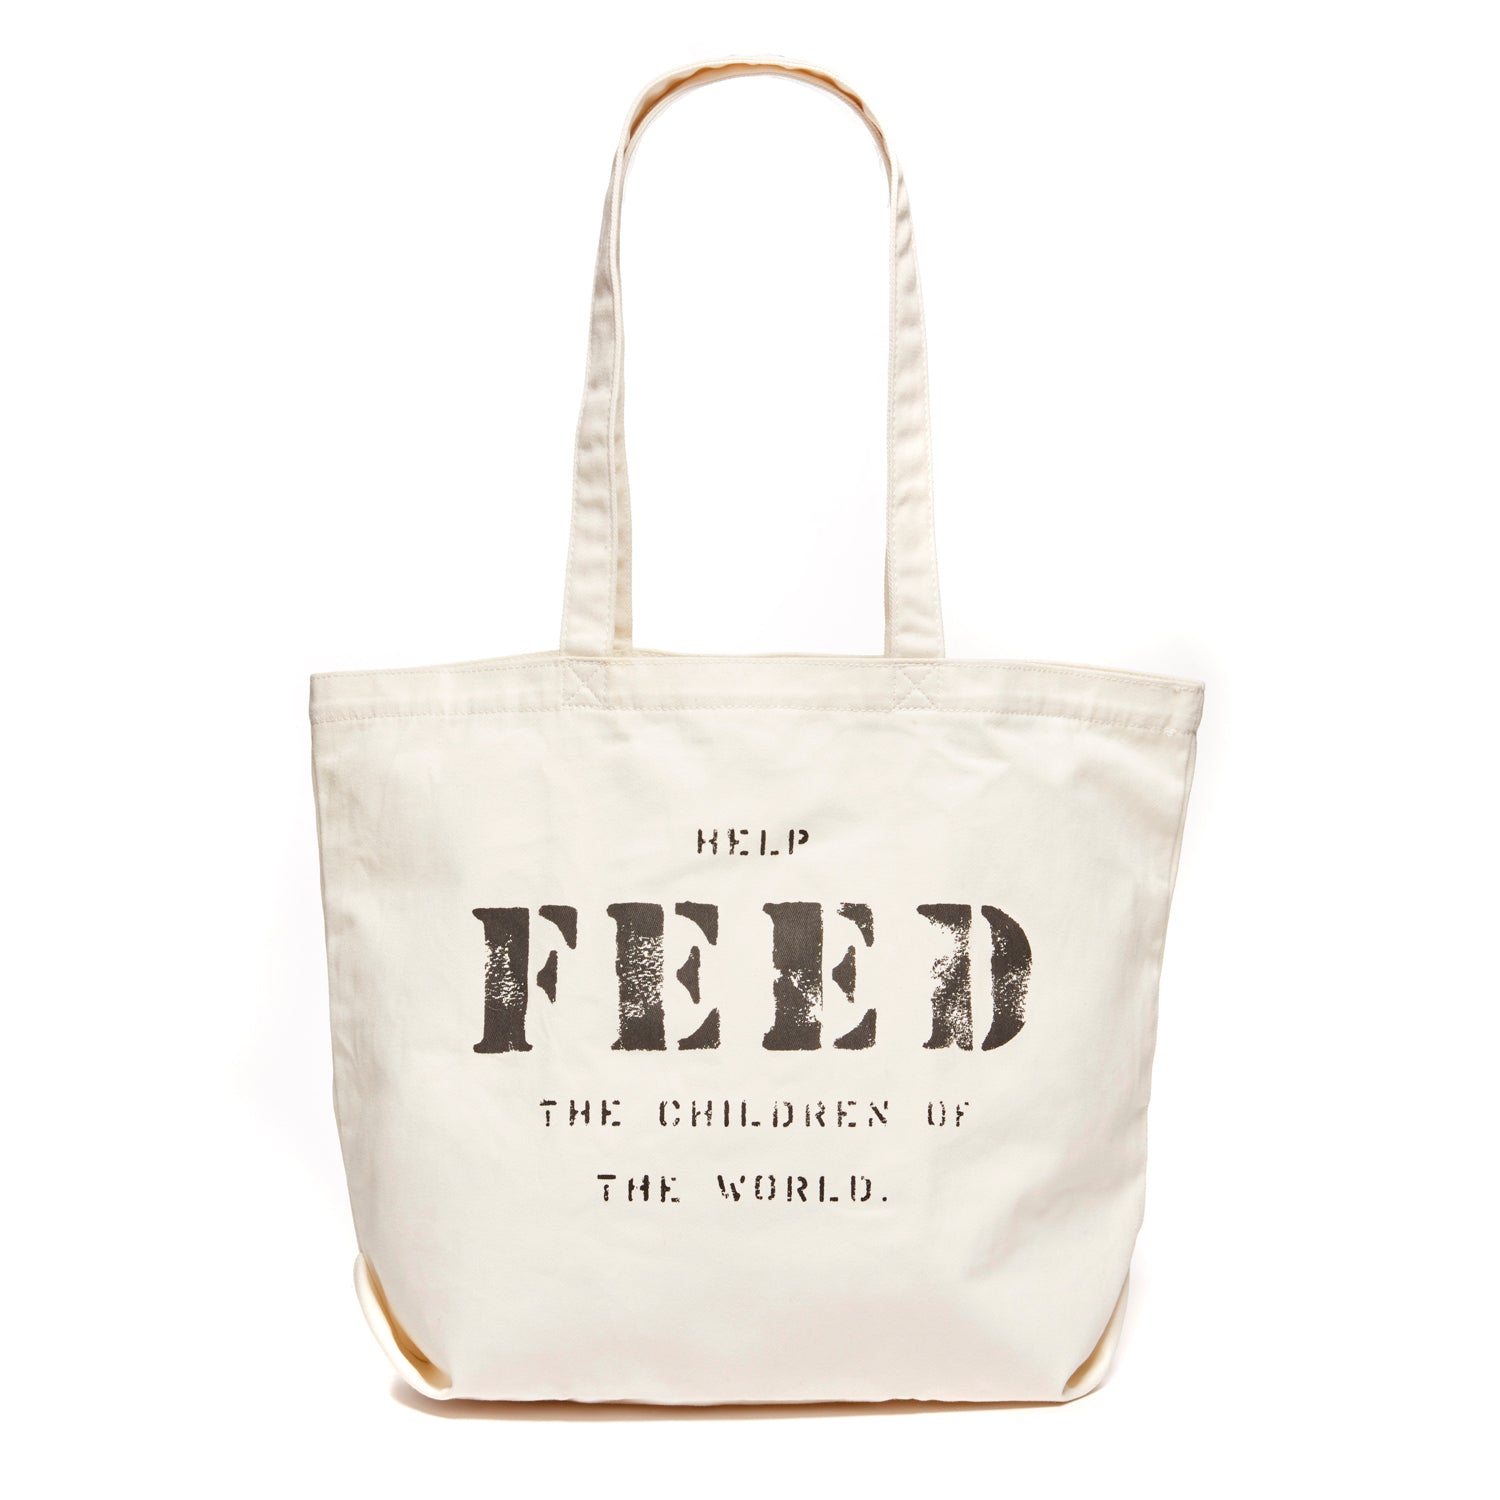 Organic Cotton Tote: The FEED 10 Bag